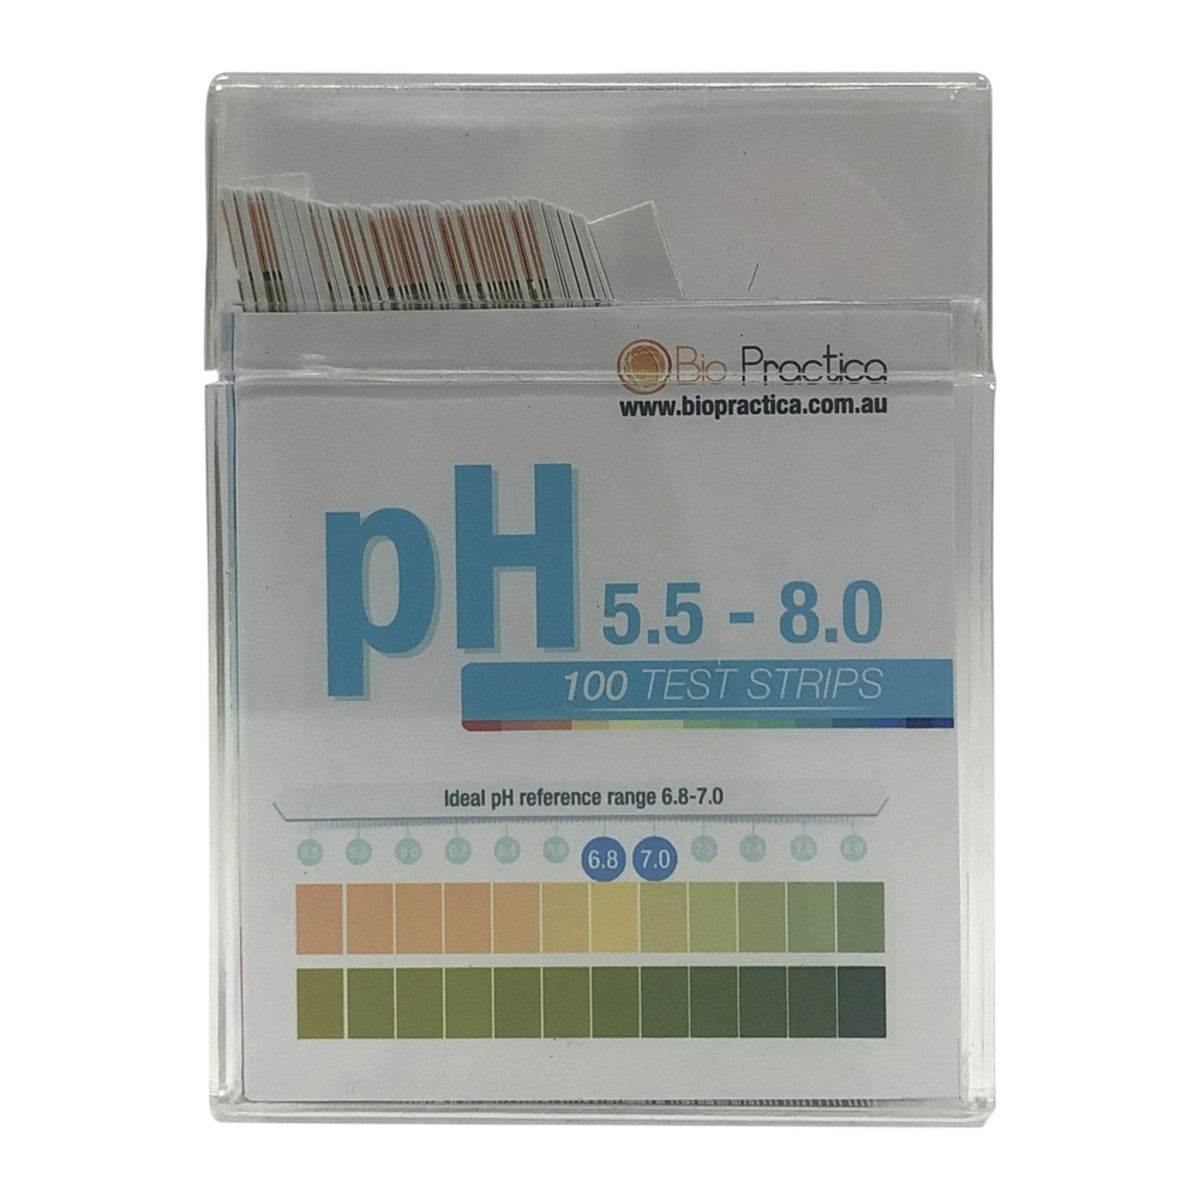 image of Bio-Practica pH Test Strips (5.5 - 8.0) x 100 Pack on white background 